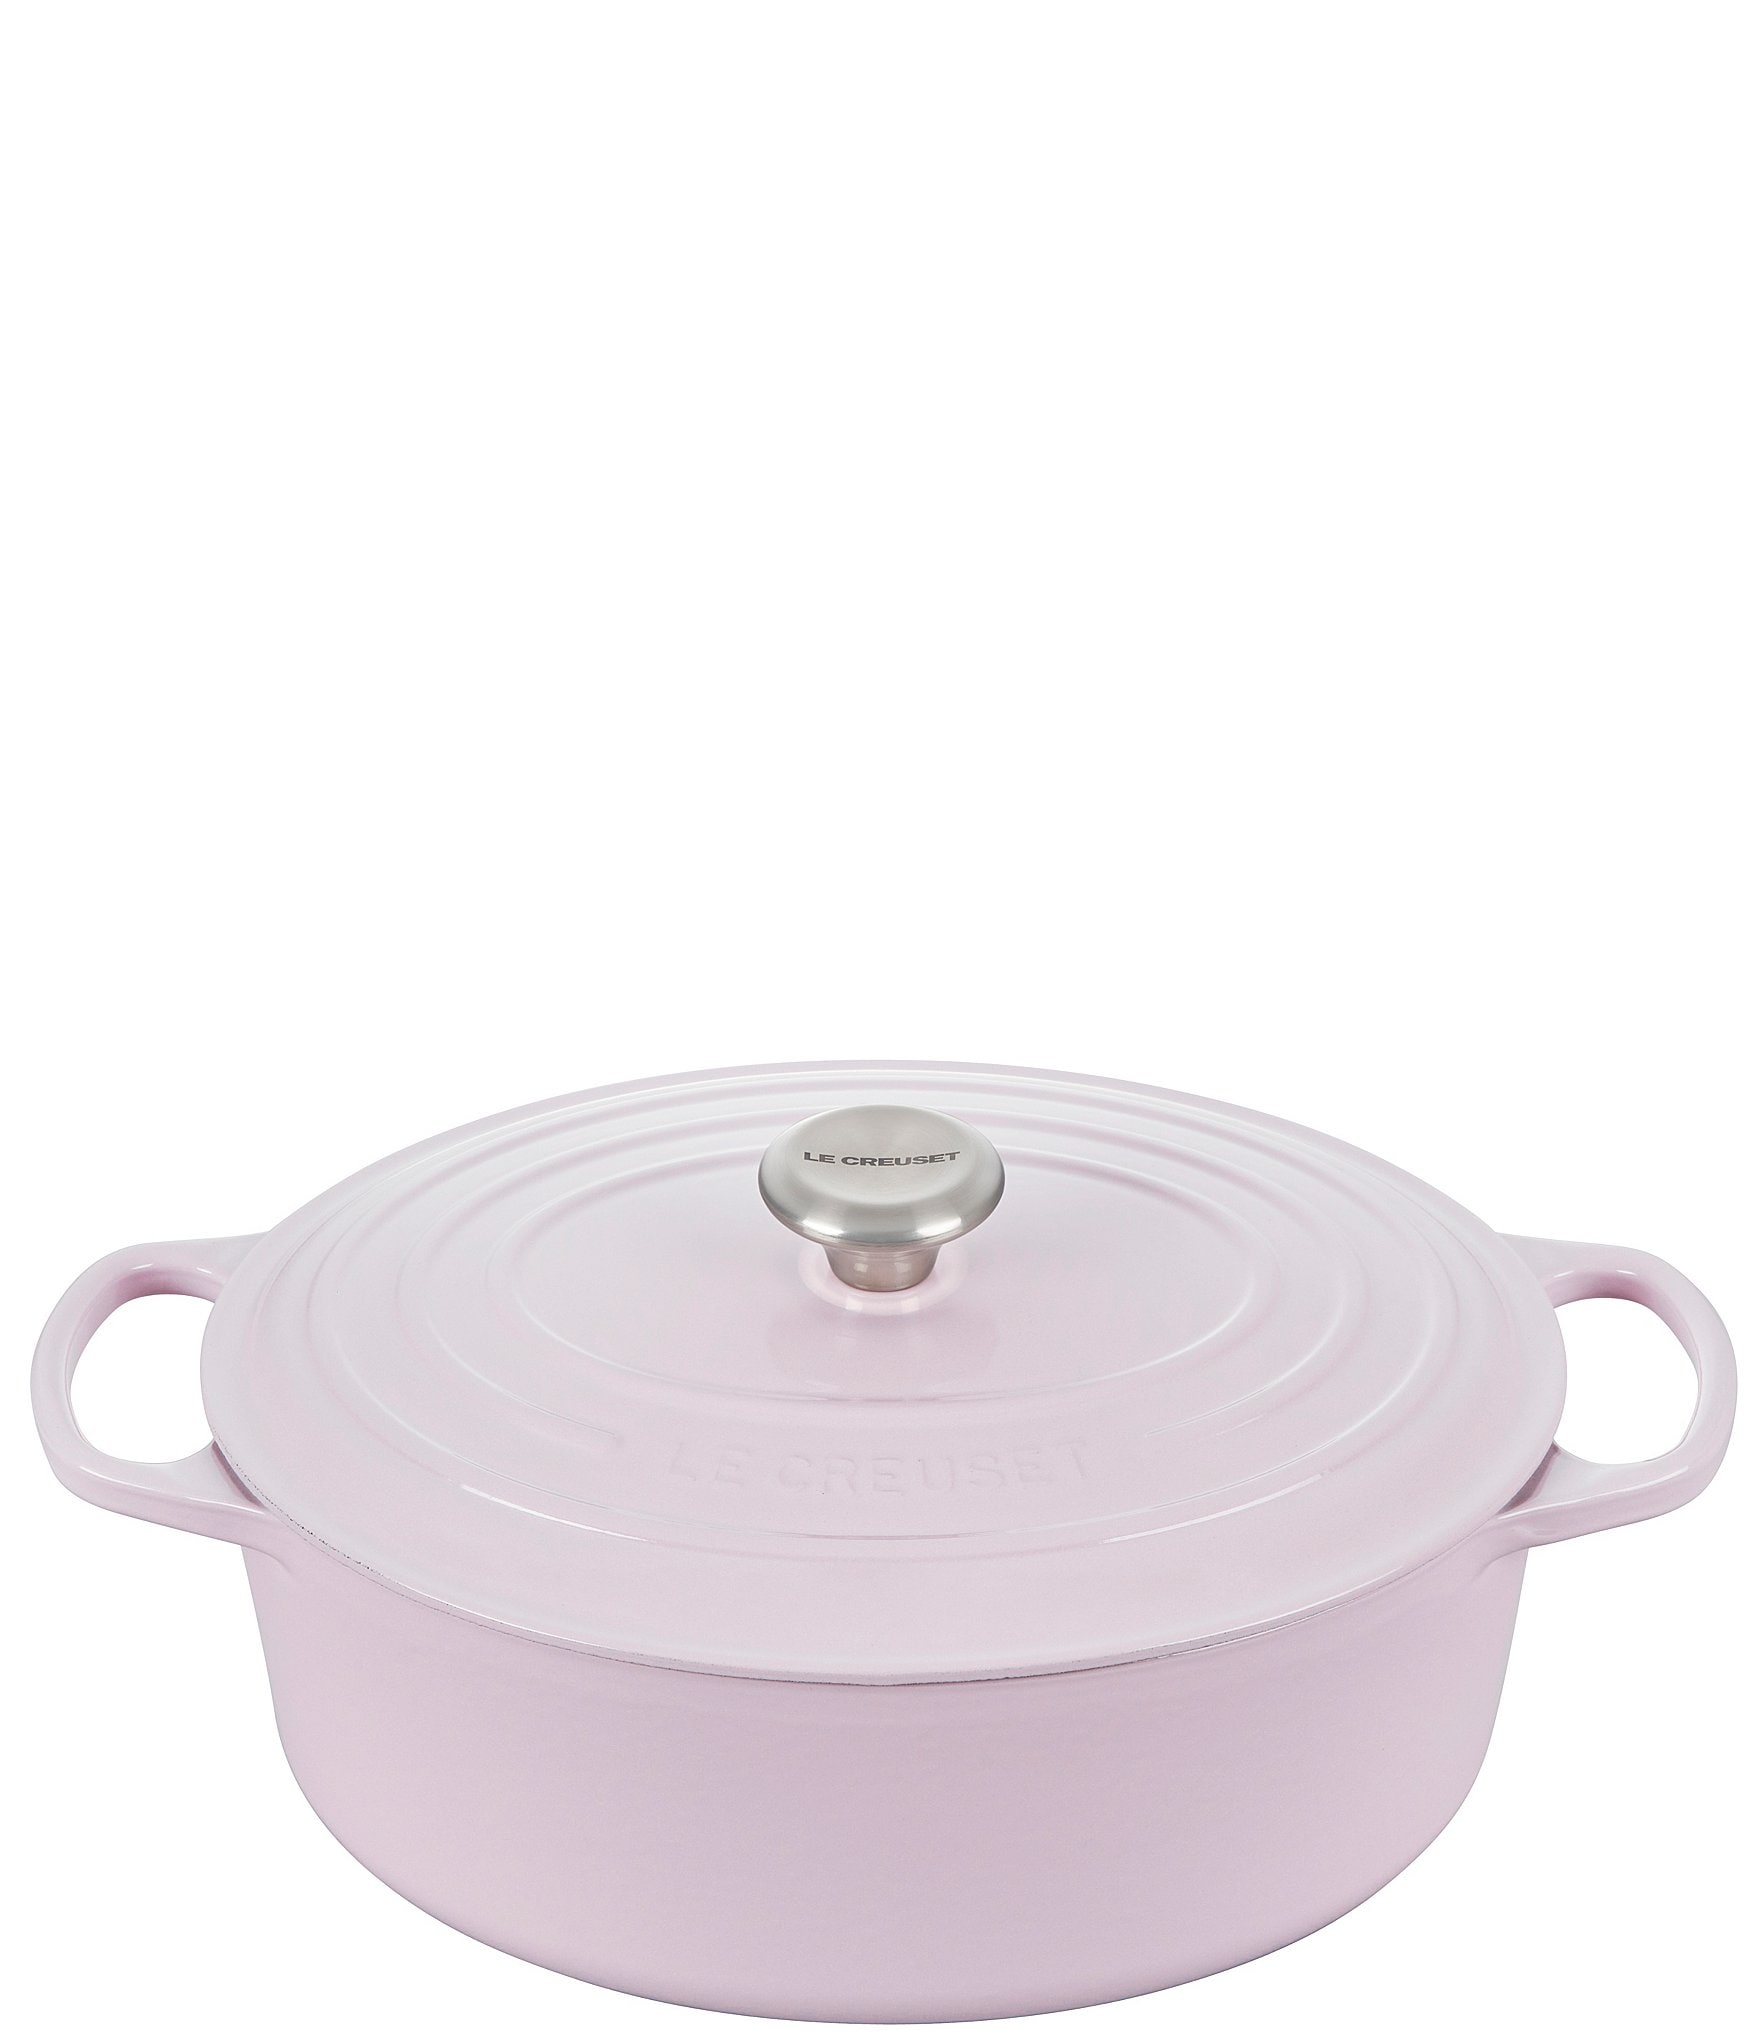 Le Creuset Oval French Oven - Signature 6.75 Qt - Oyster Grey